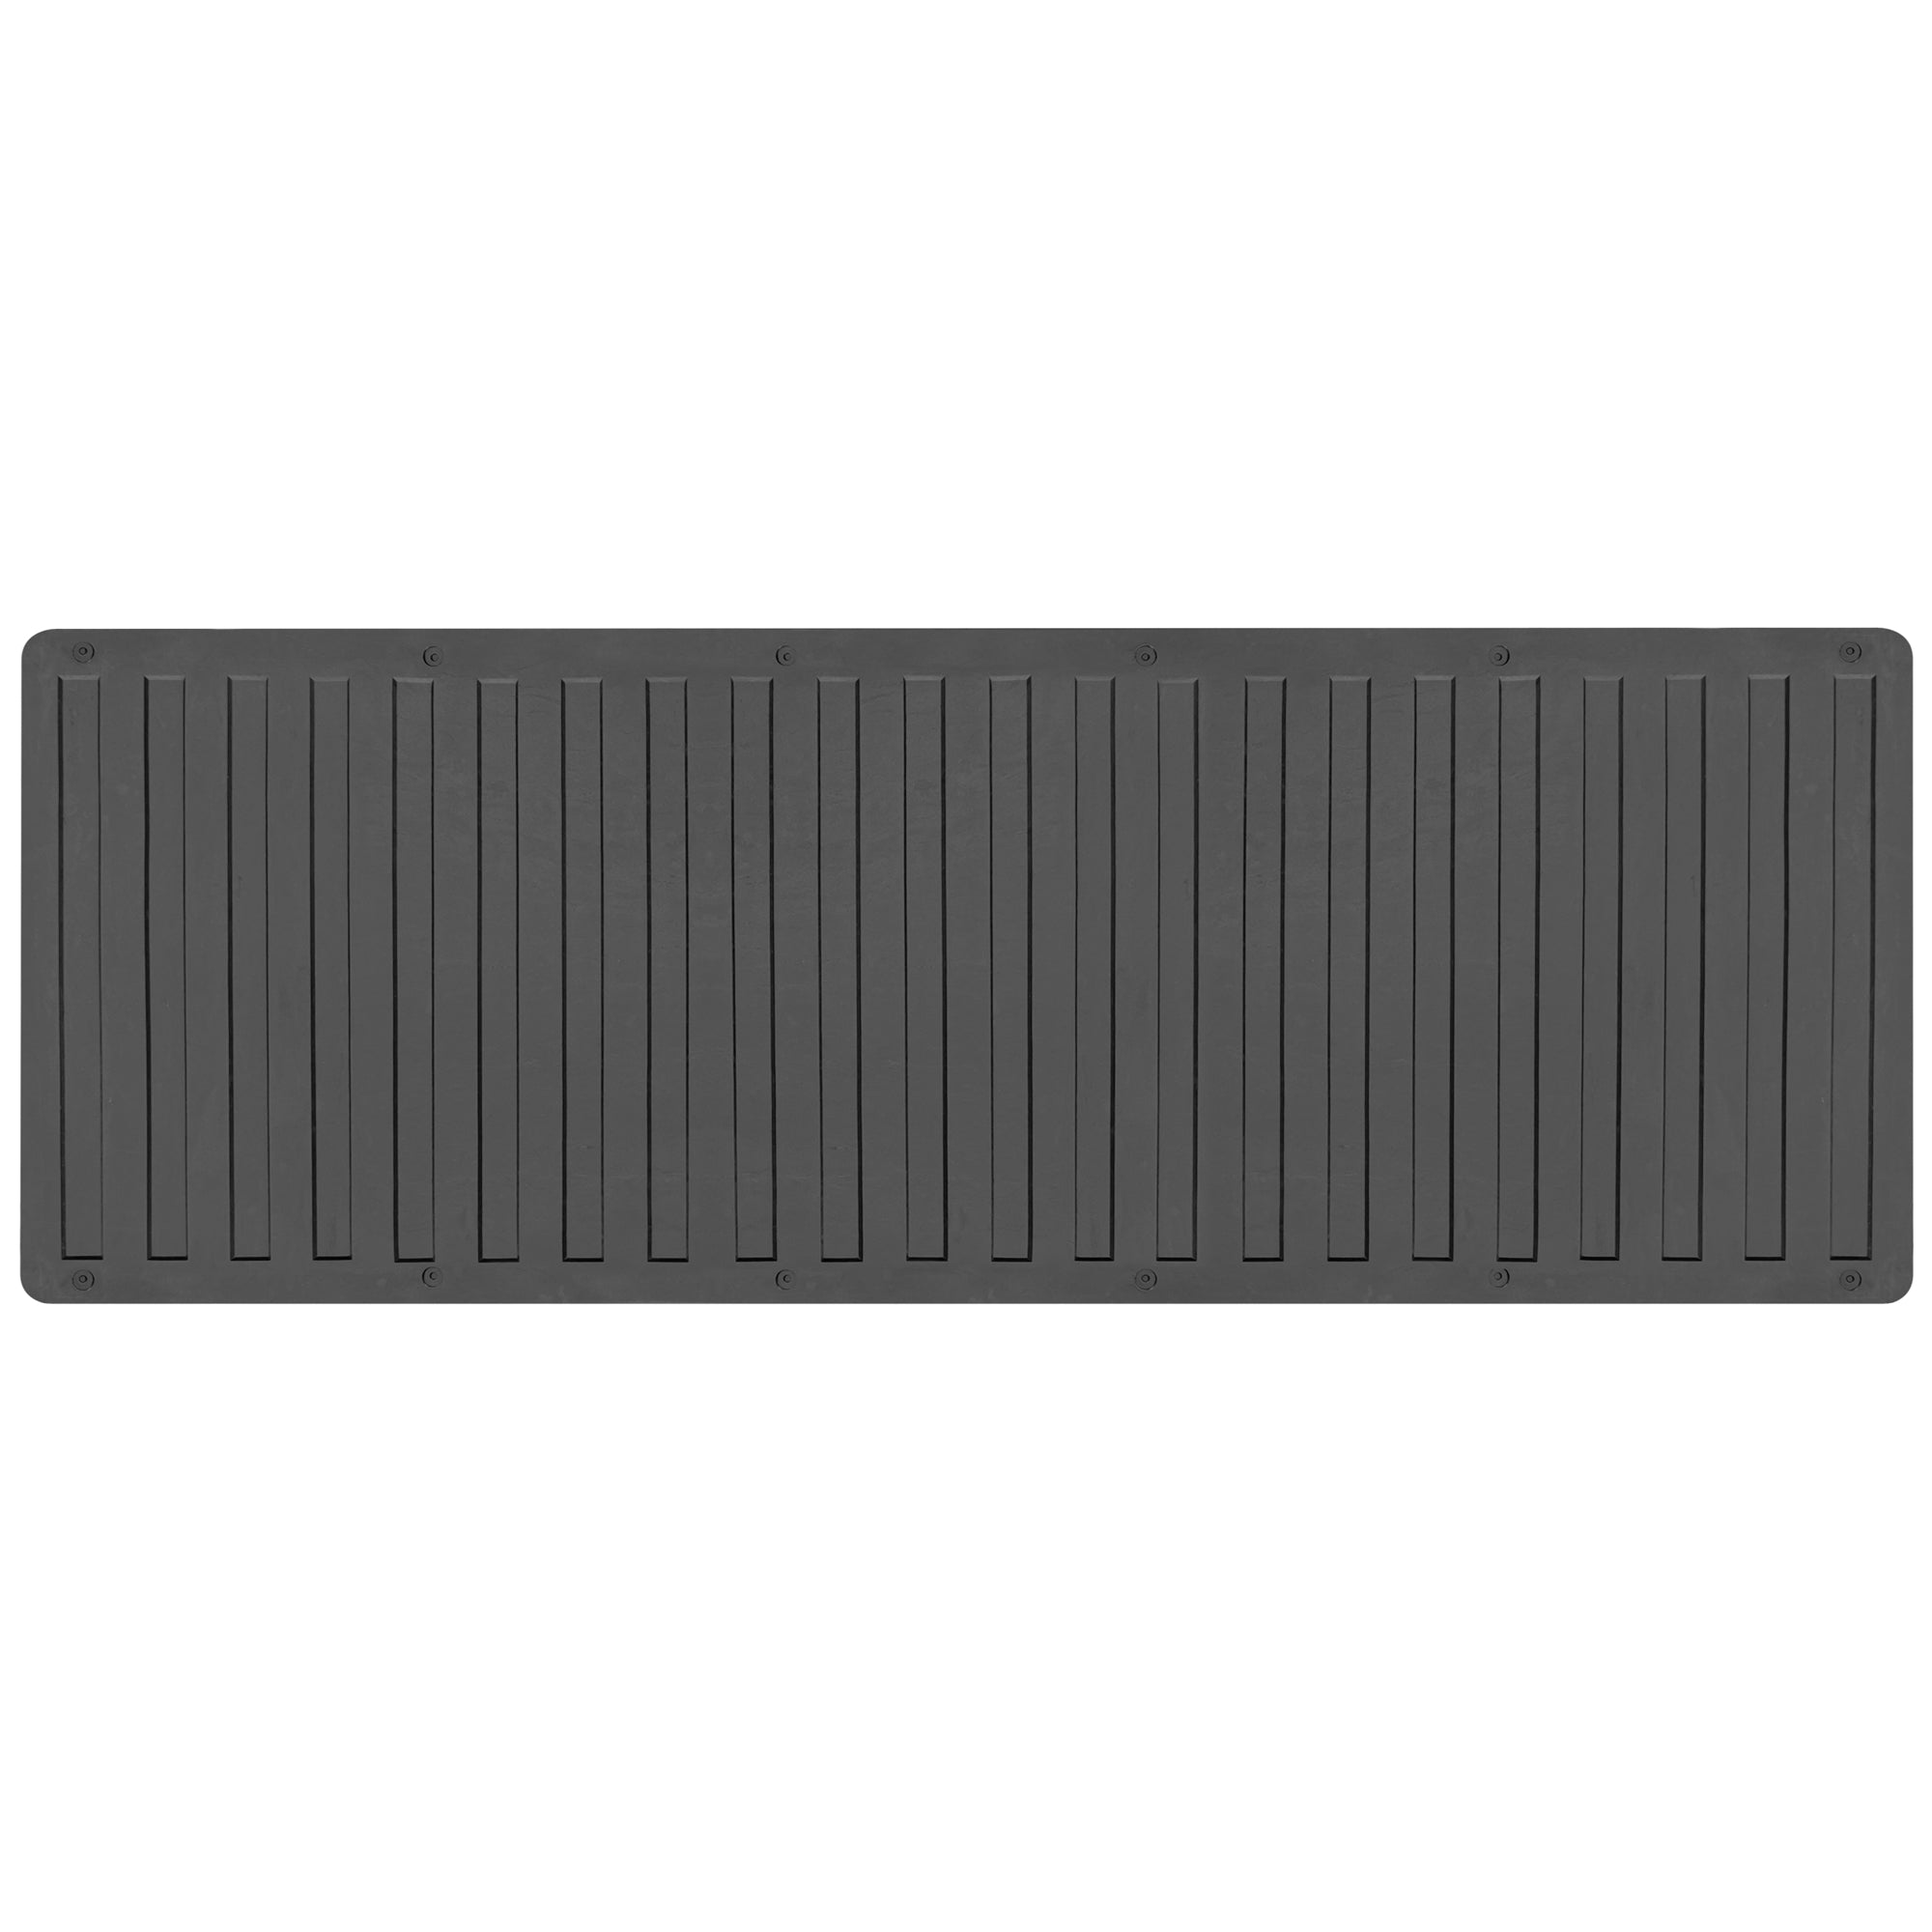 BDK-MT-600A Heavy-Duty Utility Truck Bed Tailgate Mat, 60" x 19.5" – Extra Thick Rubber Cargo Liner for Pickup Trucks with Universal Trim-to-Fit Design - Black